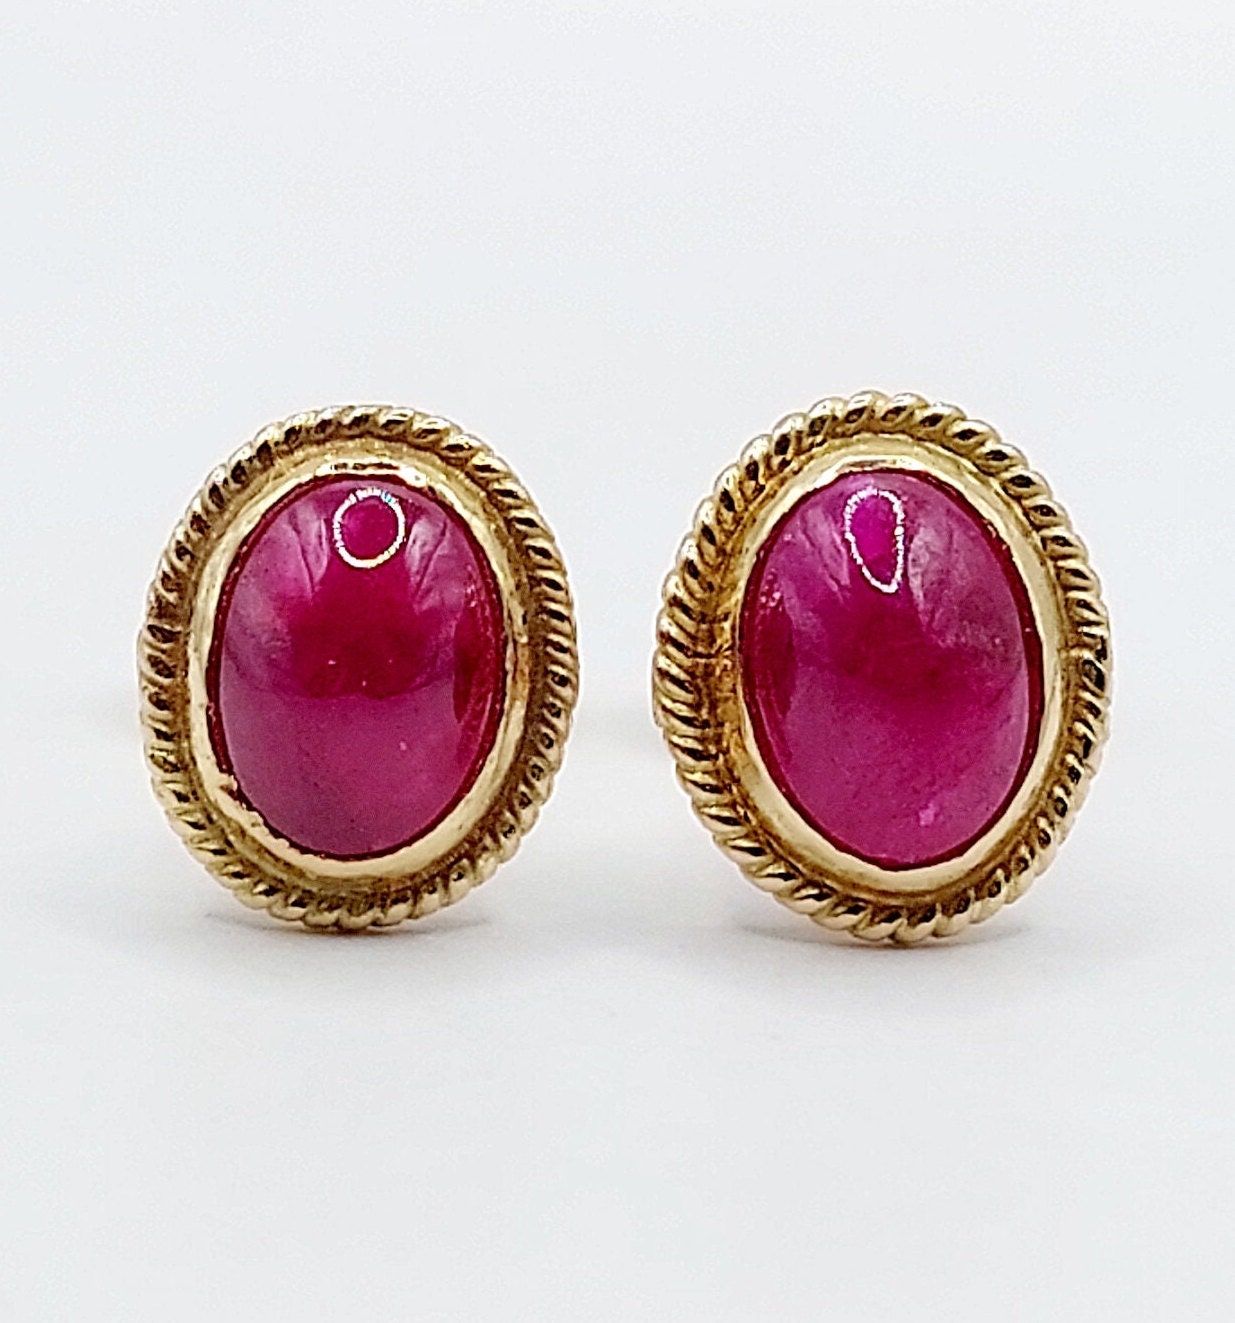 Bvlgari Vintage Gold, Ruby And Diamond Earclips Available For Immediate  Sale At Sotheby's